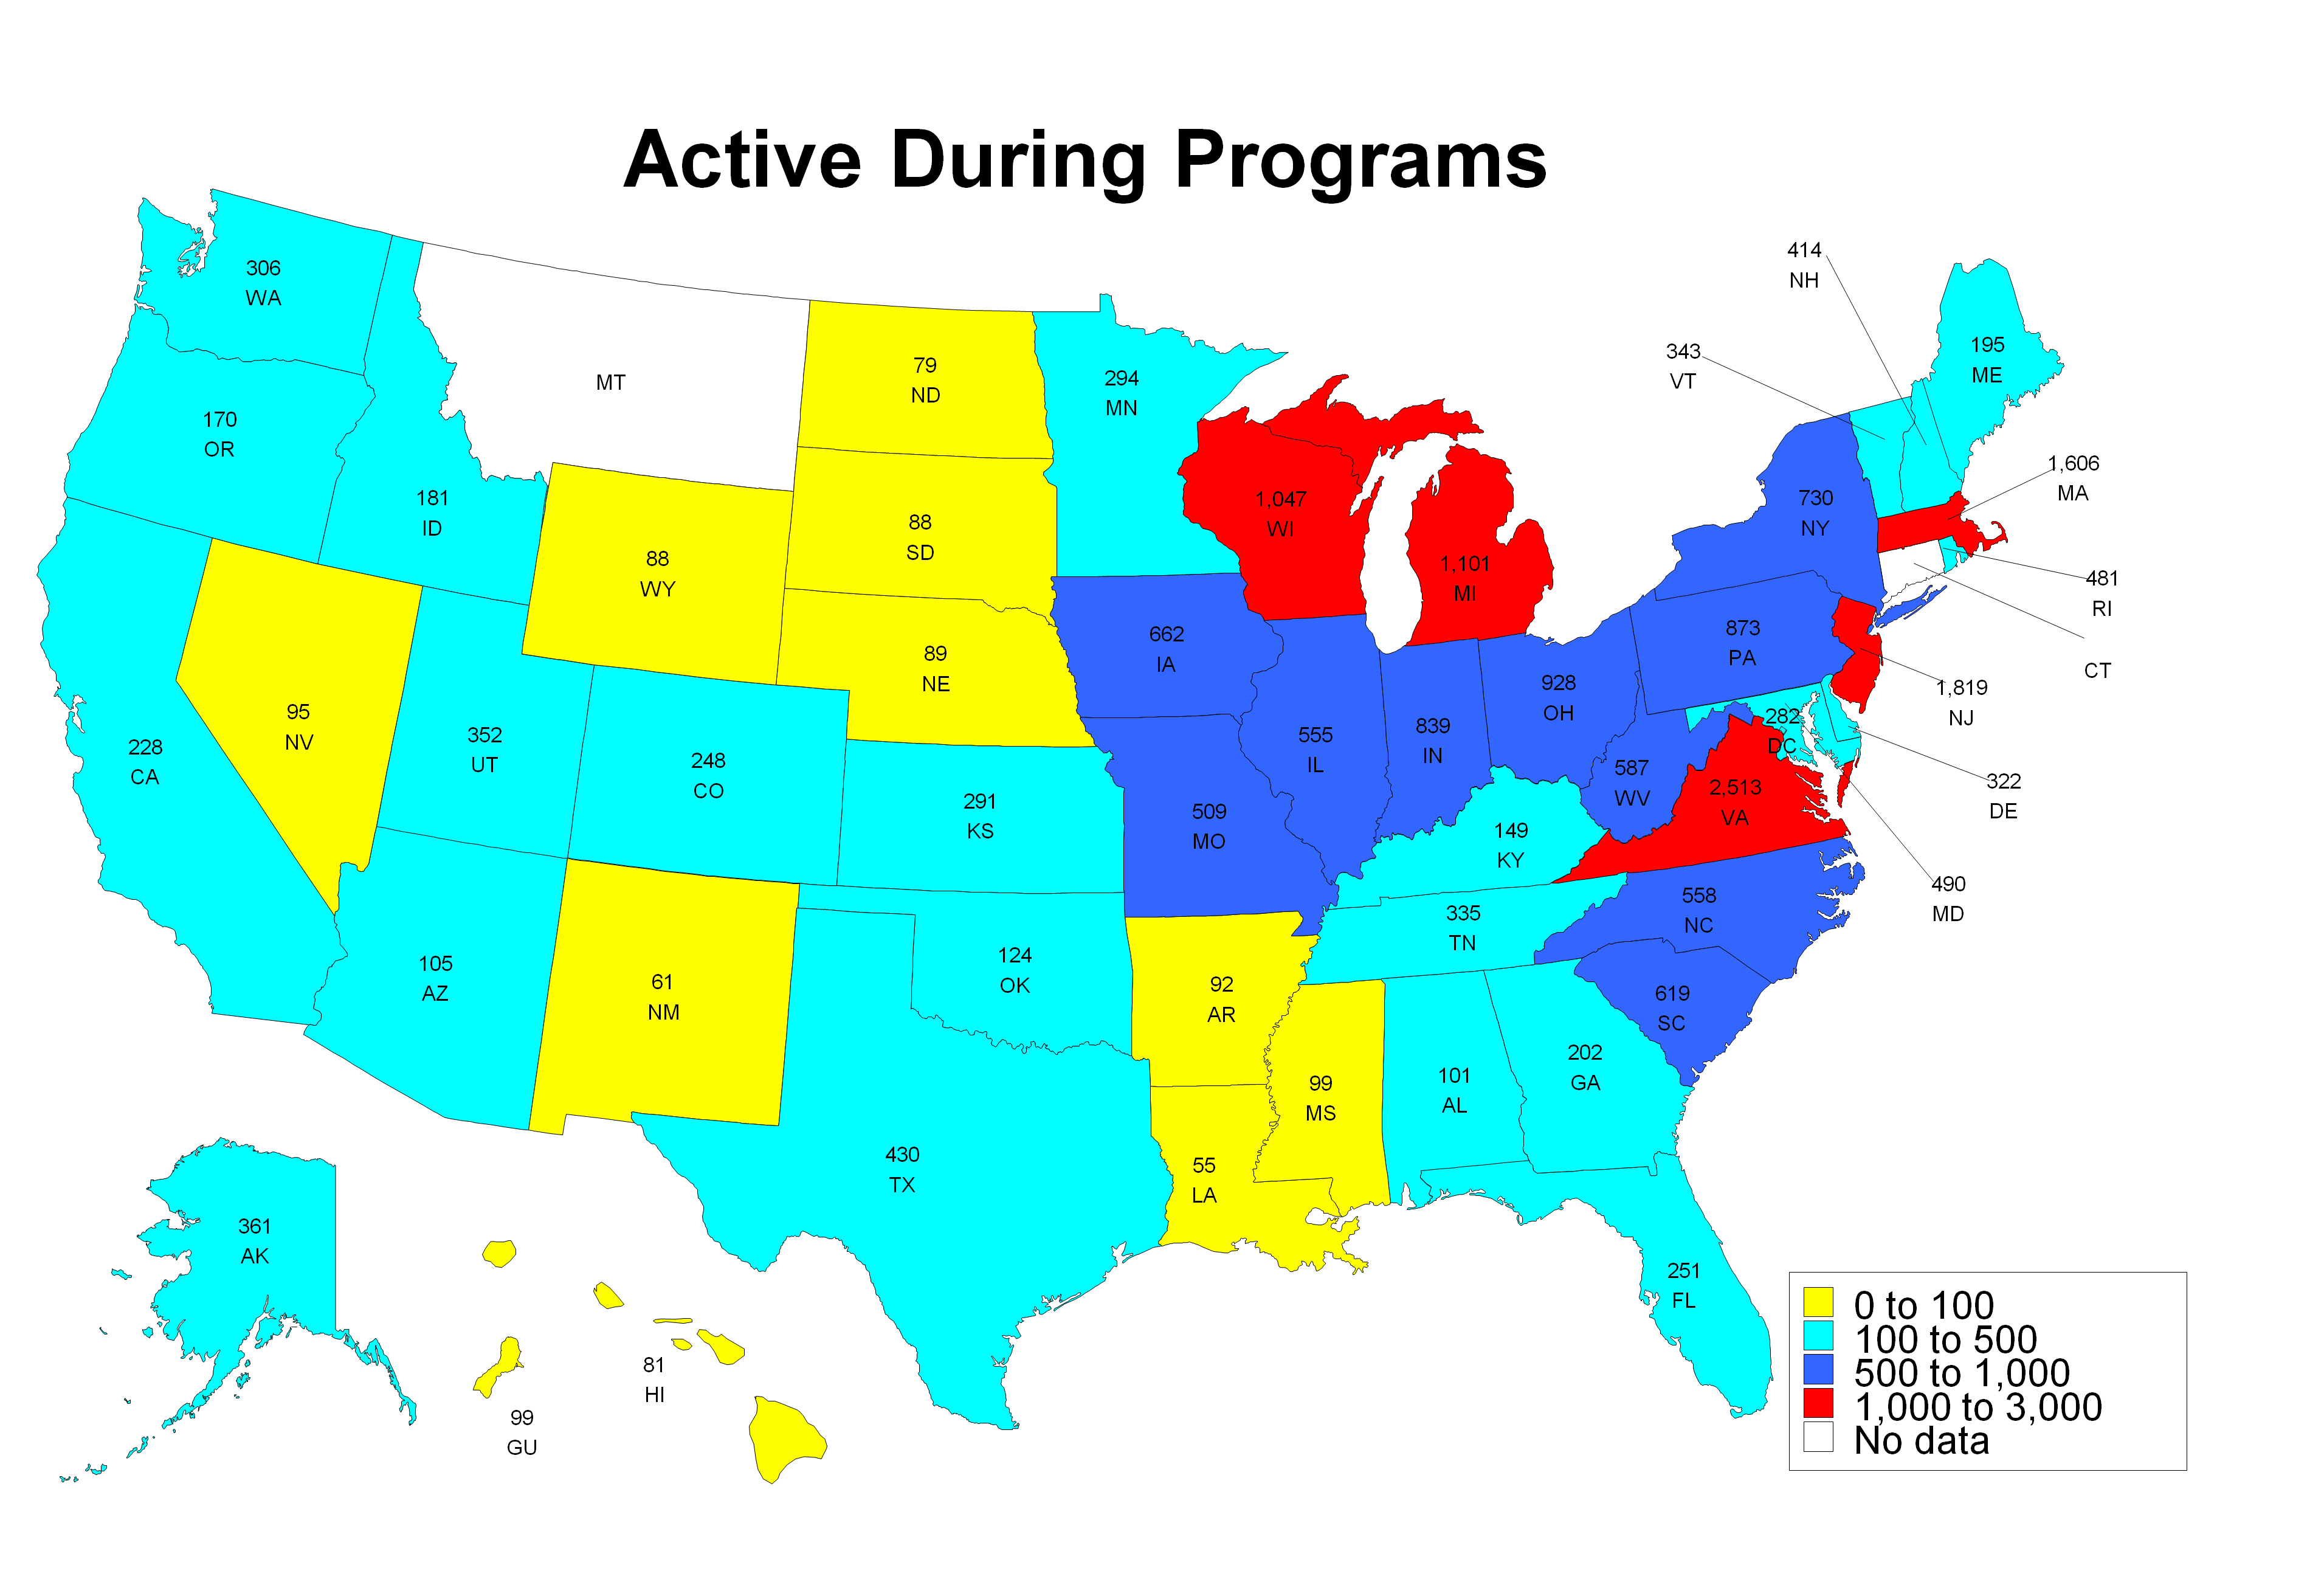 Active During Programs 2013